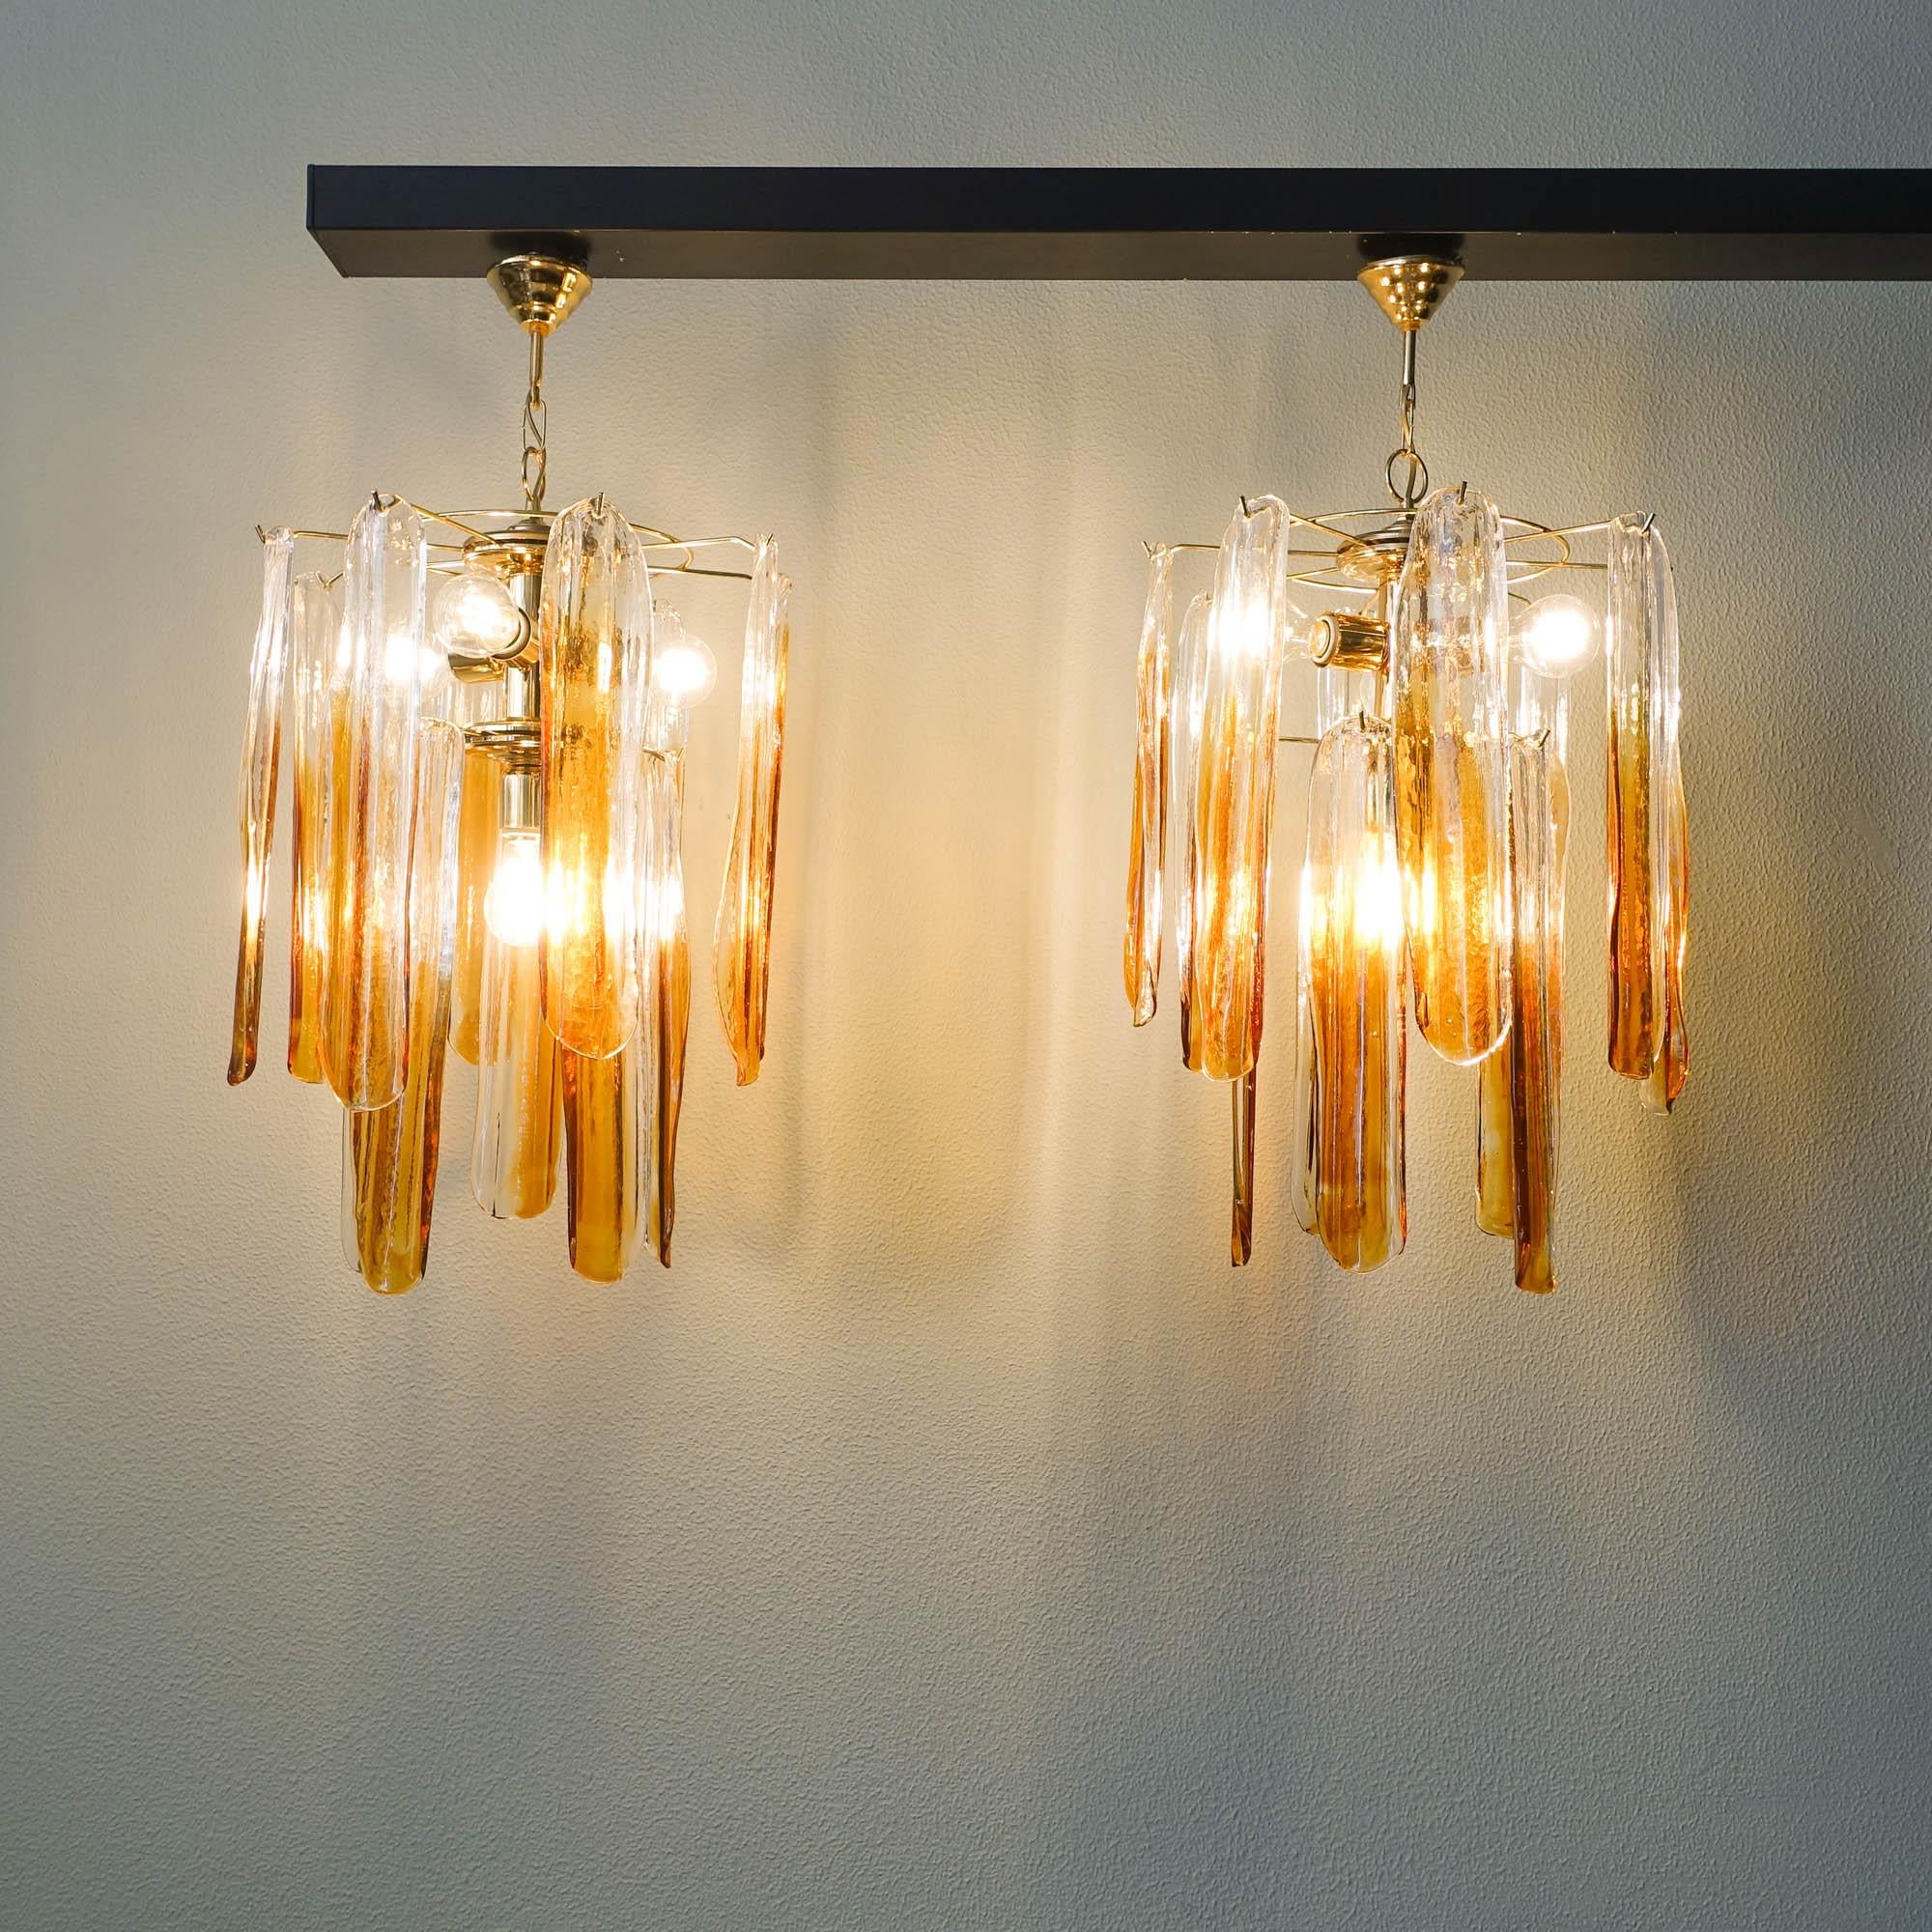 This pair of Murano glass chandeliers was designed by Carlo Nason and produced by Mazzega, in Italy, during the 1970's. Each lamp features twelve organic-shaped Murano glass plates, running from clear to amber that nicely diffuse the light.  Each